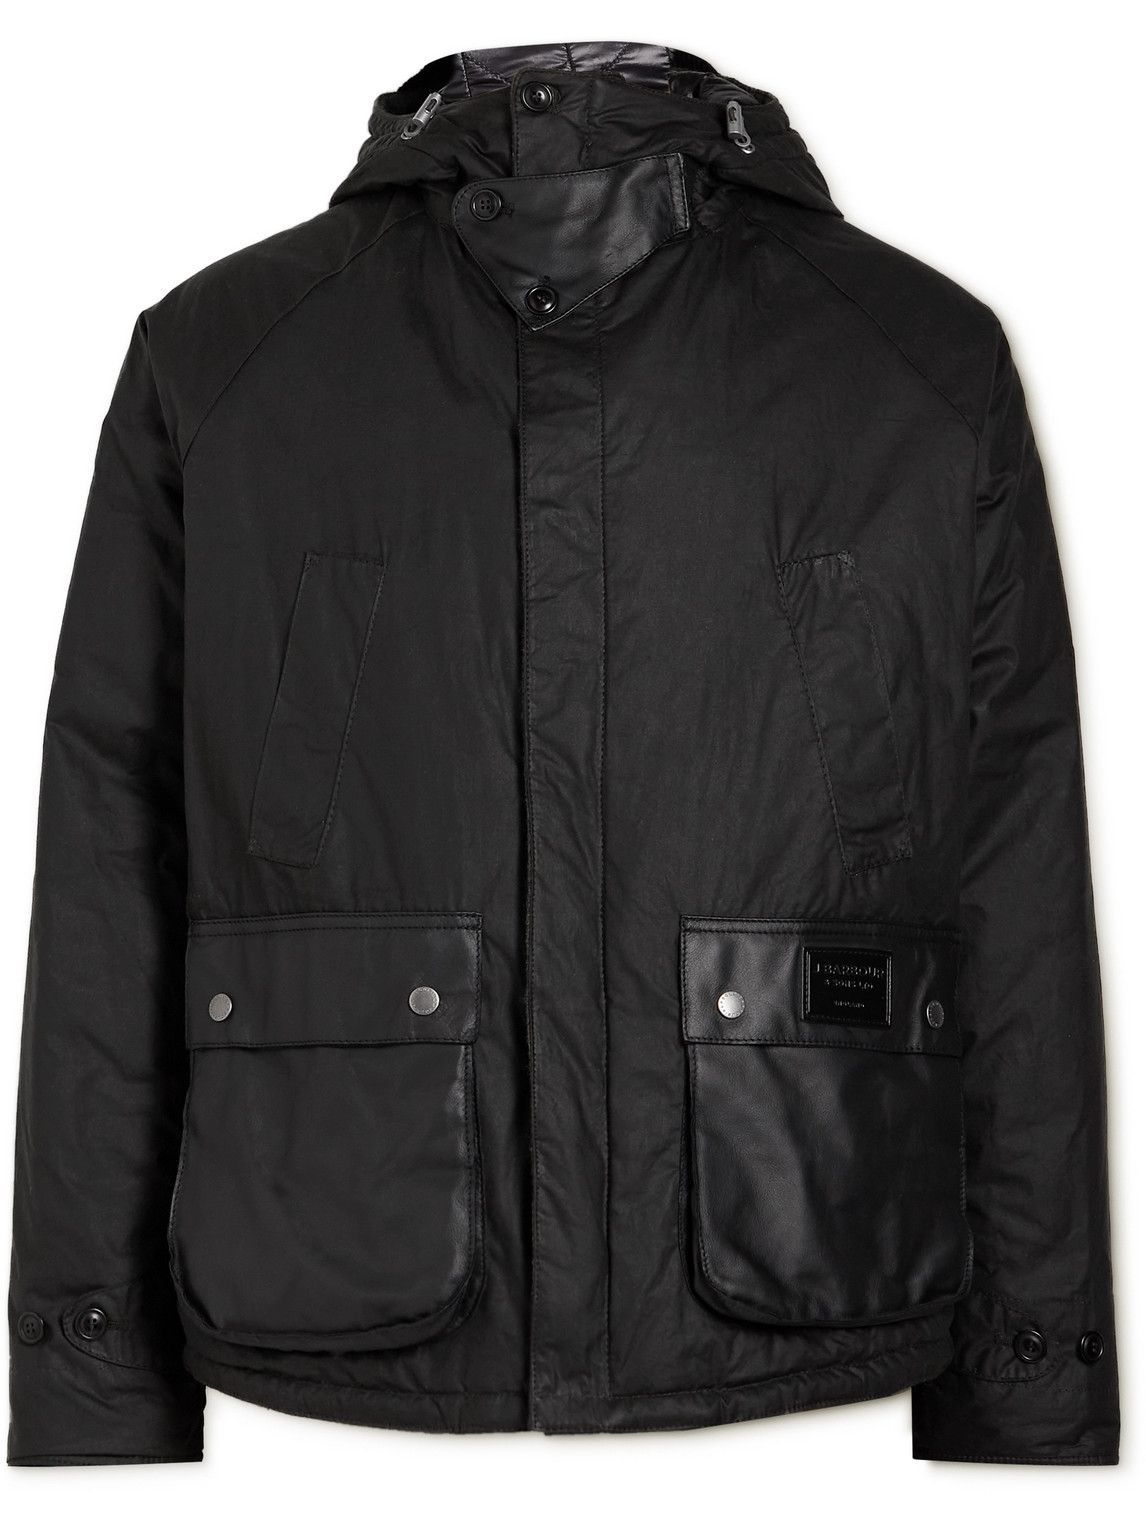 Barbour Gold Standard - Soay Padded Leather-Trimmed Waxed-Cotton Hooded Jacket - Black